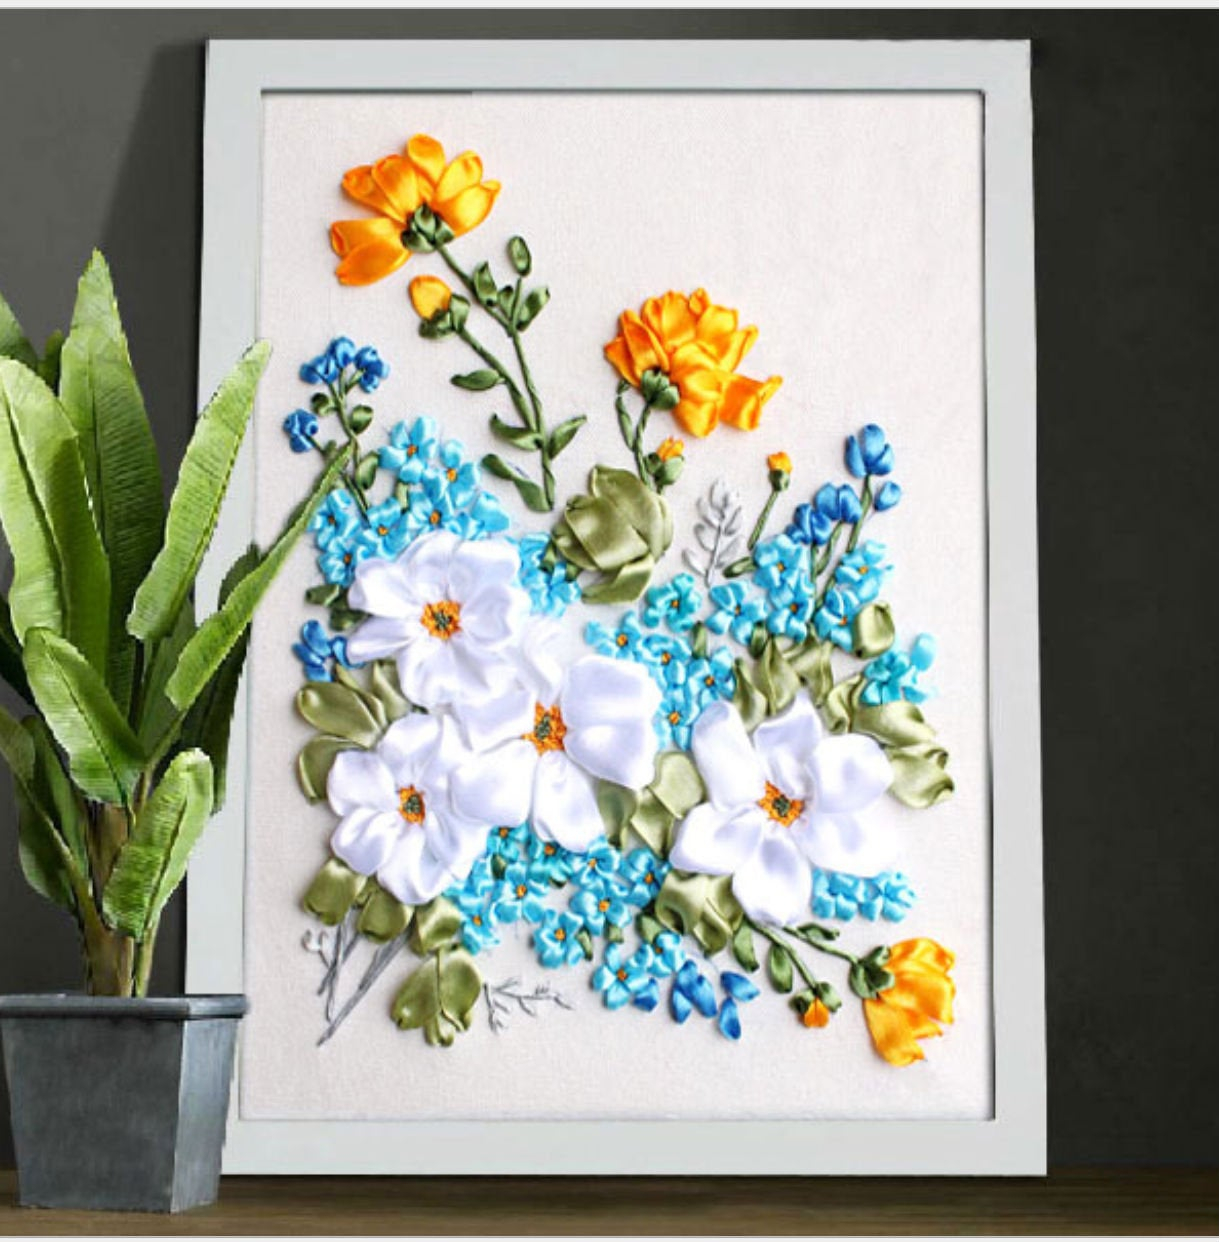 Ribbon Embroidery Flowers Patterns Diy Ribbon Embroidery Kit Flower Garden Printed Pattern Cotton Home Decor 45x35cm